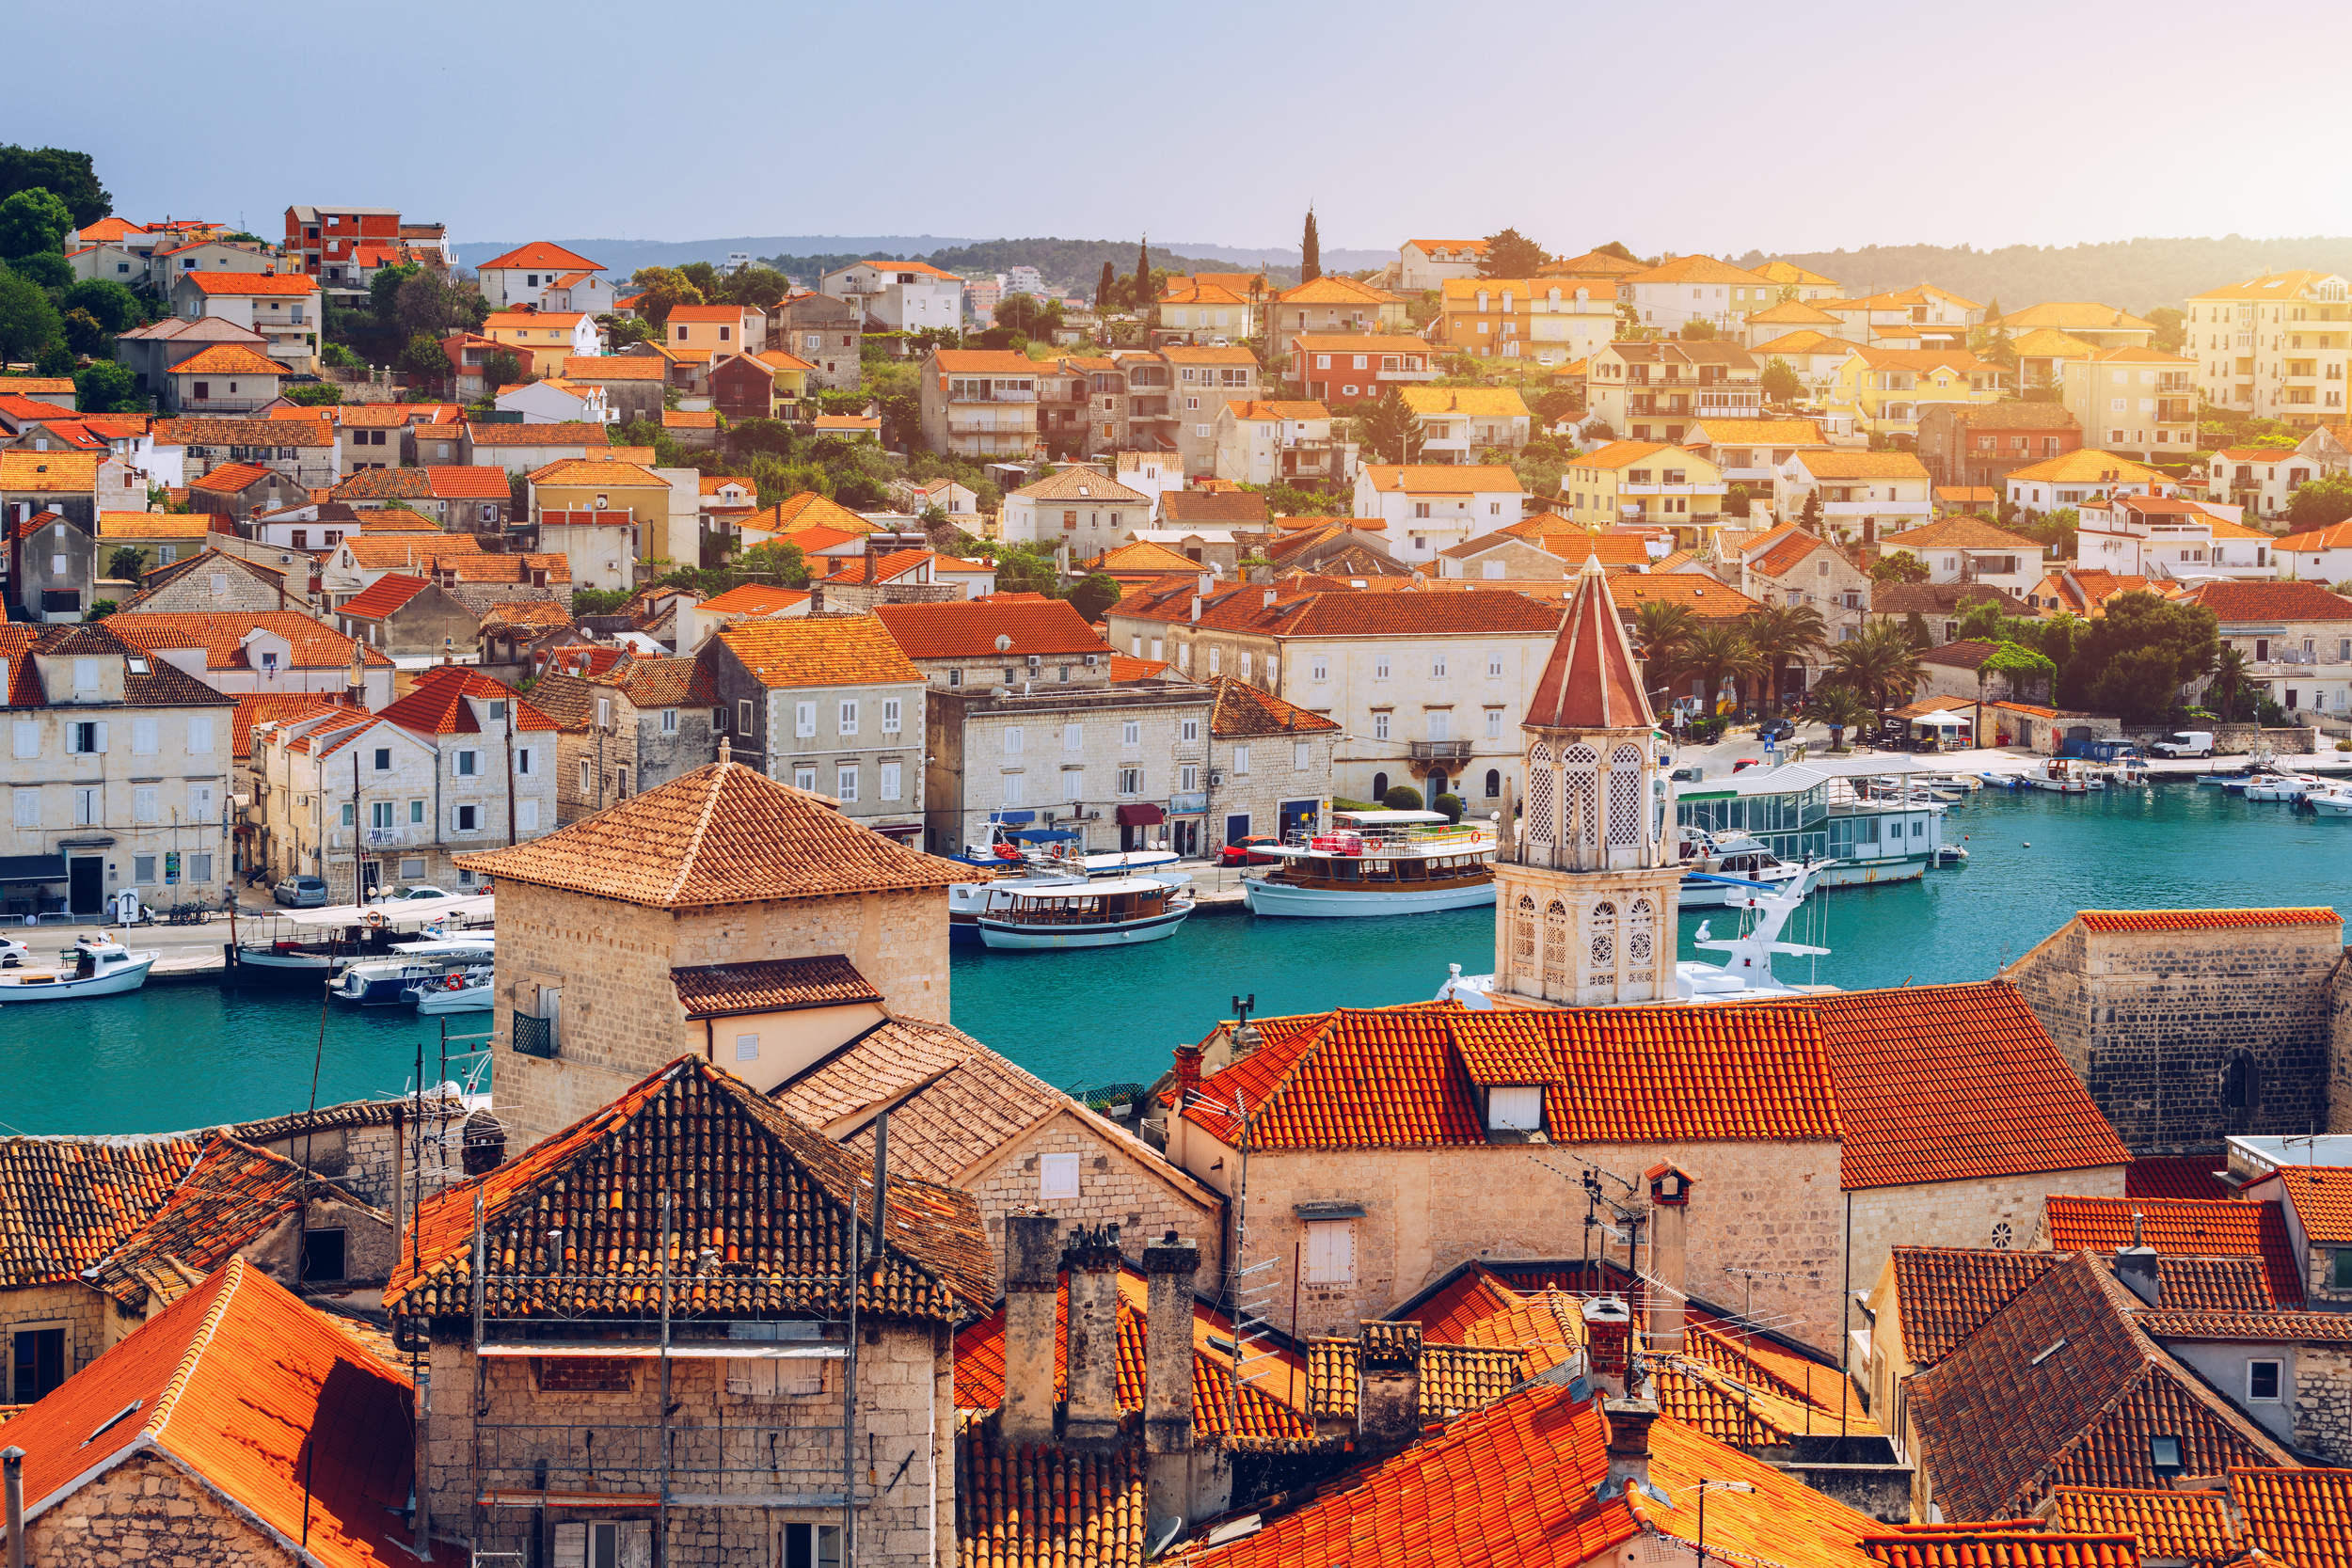 <p>For the perfect day trip from Split, book one of the many boat tours or ferries that stop in Trogir. Home to an exceptionally preserved Old Town that is UNESCO designated, there’s no shortage of picture-perfect scenes. There are also quite a few good cafes for such a small place.</p><p>You may also like: <a href='https://www.yardbarker.com/lifestyle/articles/18_things_you_think_are_normal_but_are_actually_uniquely_american_033024/s1__39111167'>18 things you think are normal but are actually uniquely American</a></p>